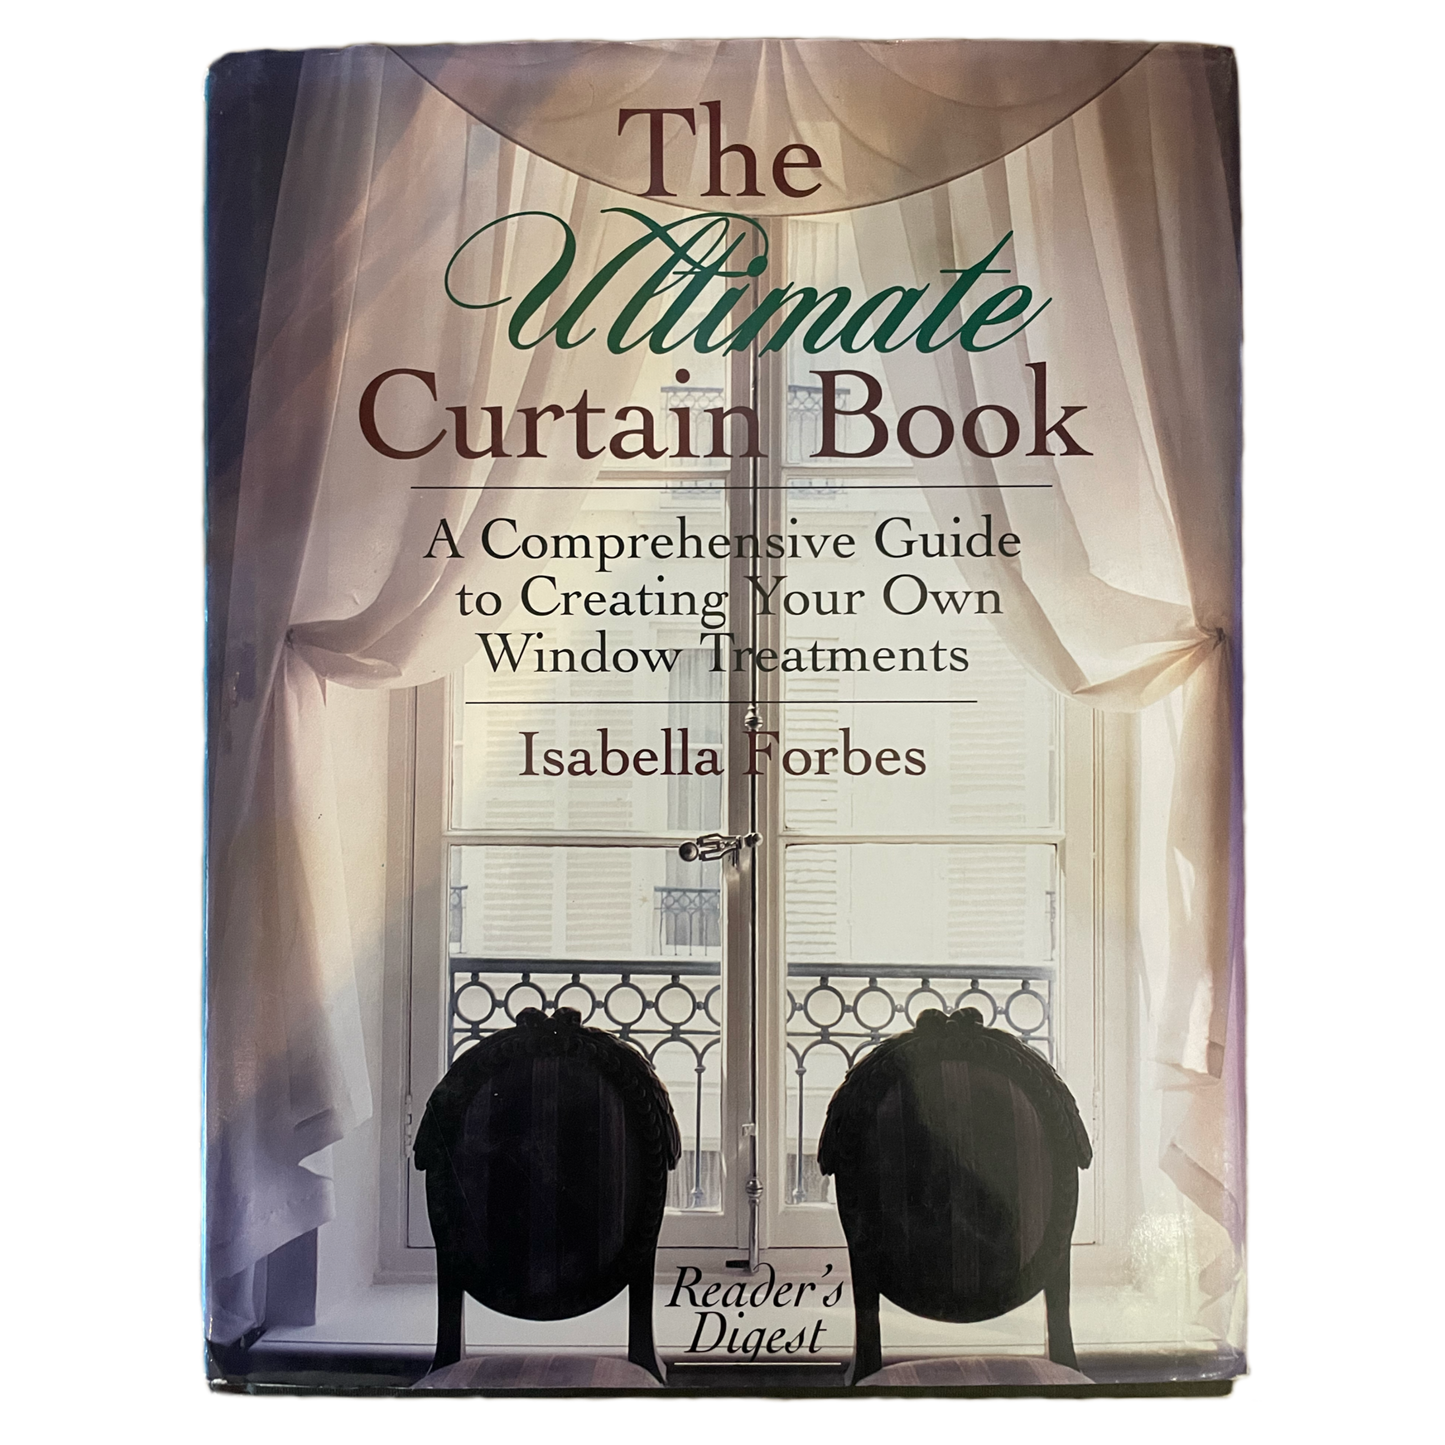 The Ultimate Curtain Book by Isabella Forbes